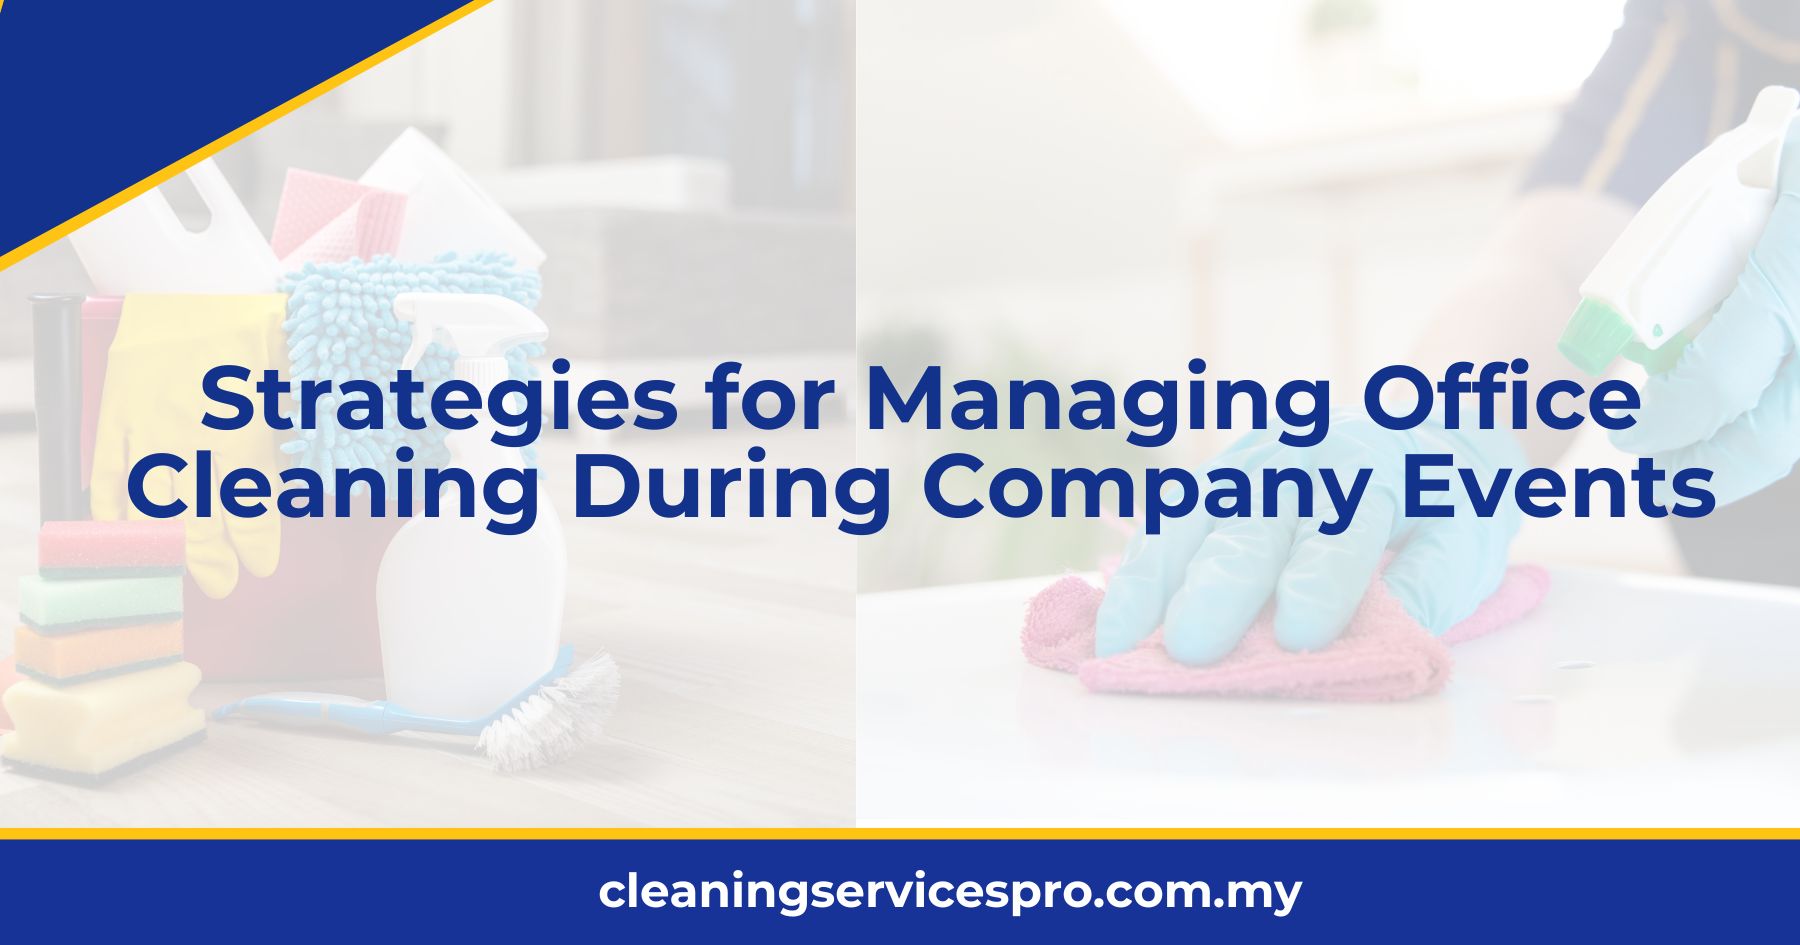 Strategies for Managing Office Cleaning During Company Events